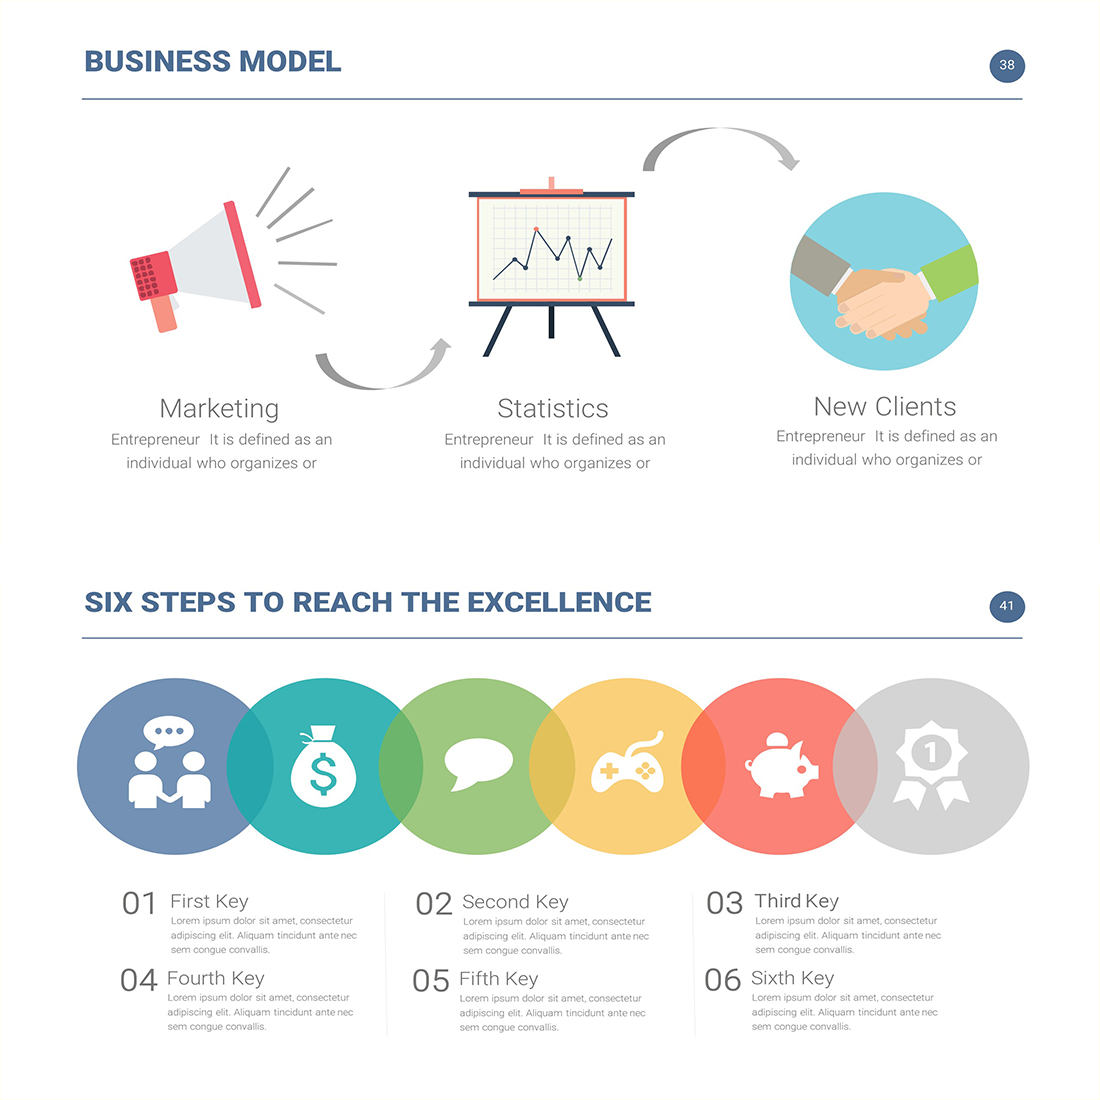 Business Plan Presentation Template for your bright ideas.